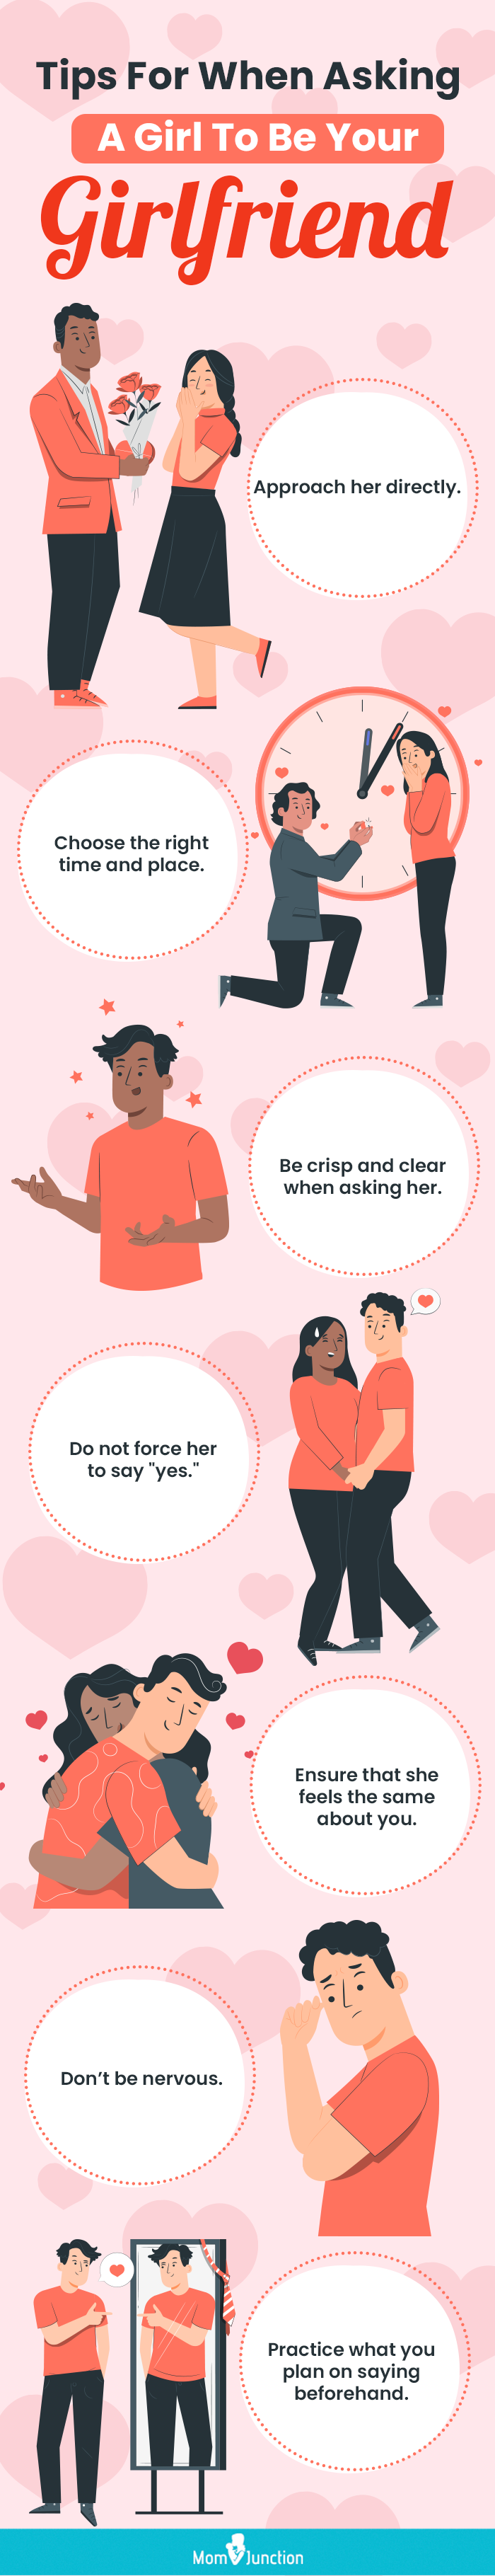 cute ways to ask a girl to be your girlfriend over text